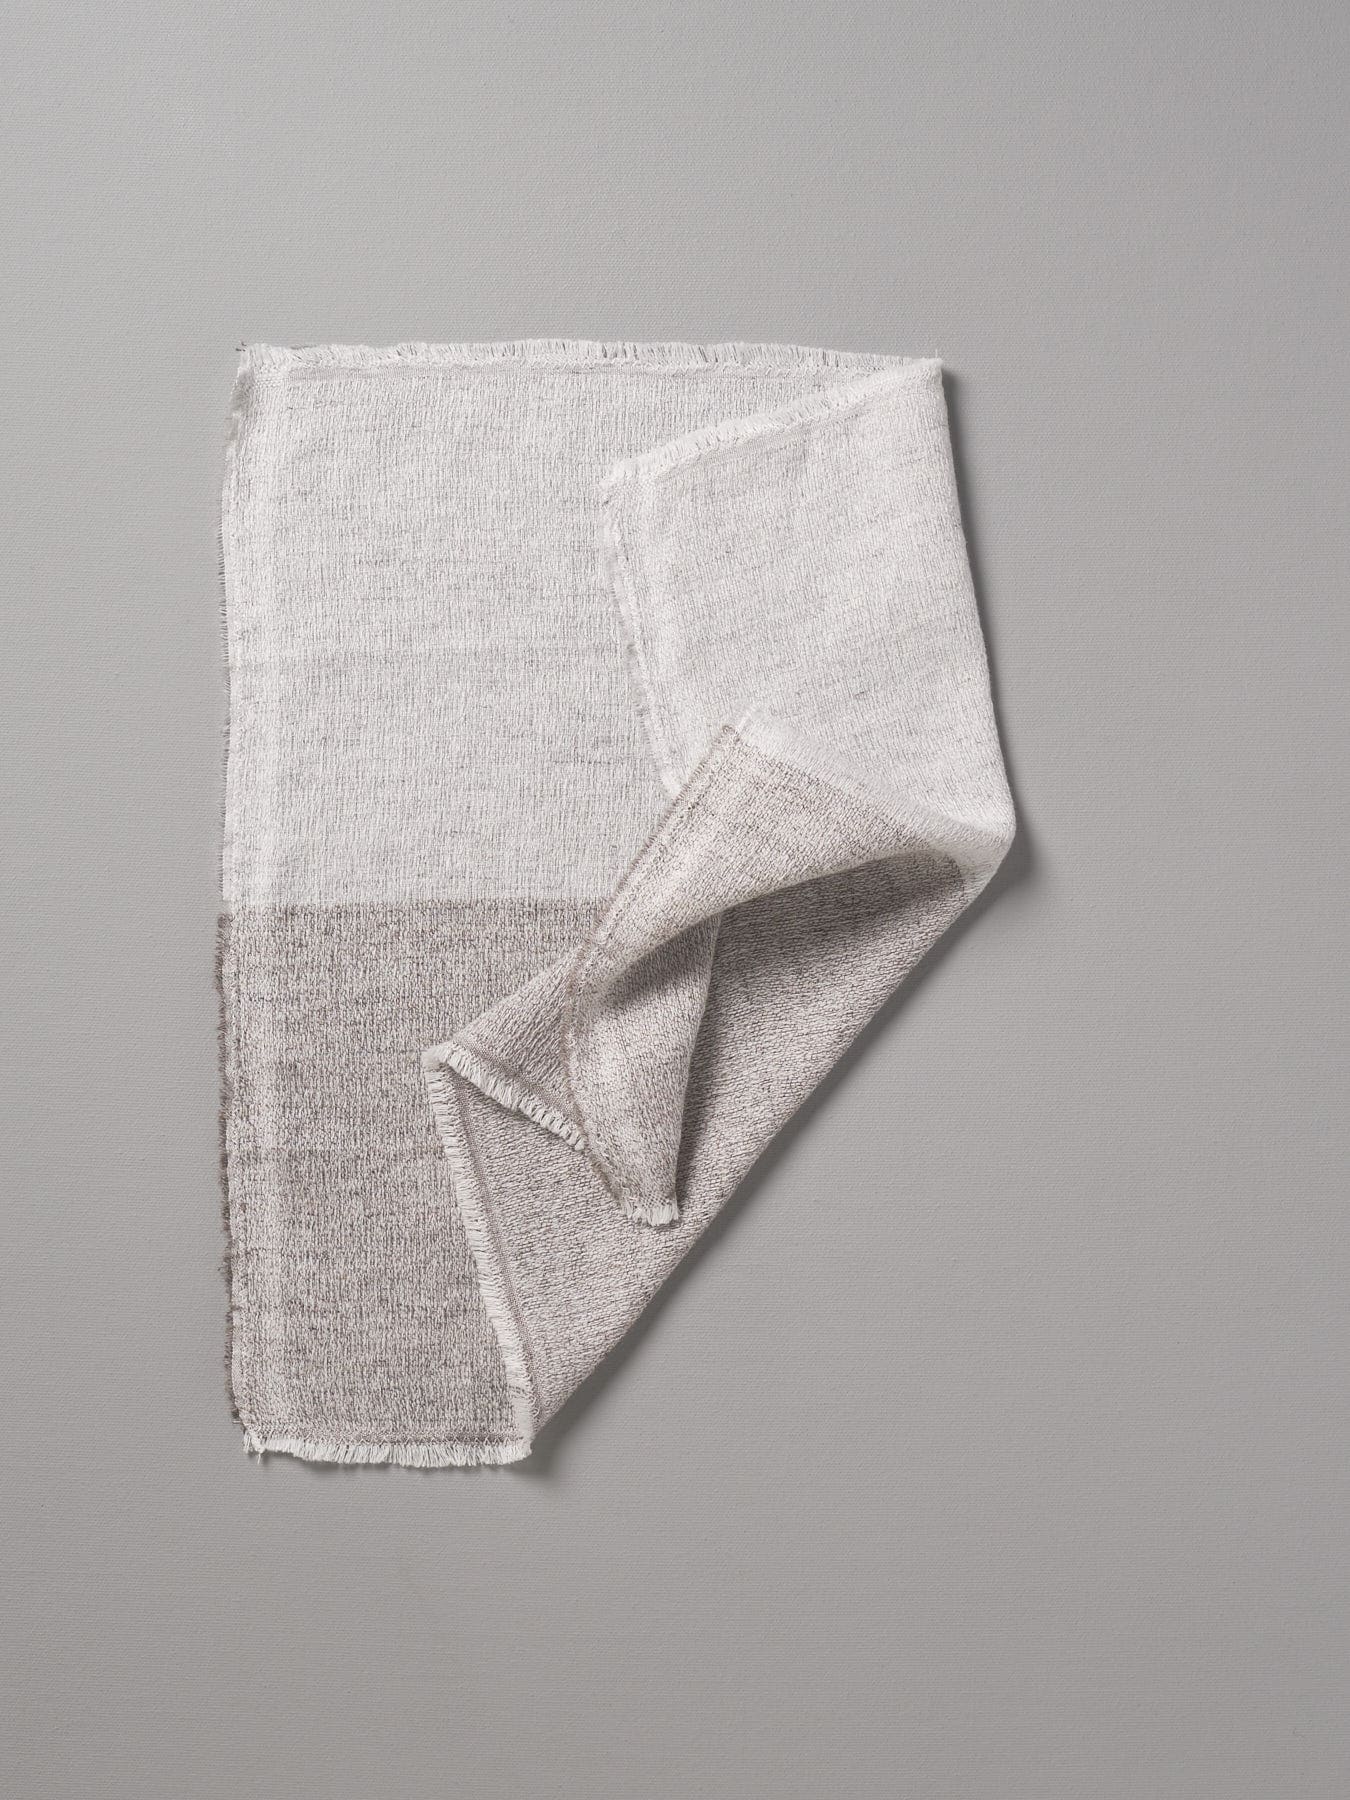 A folded Kontex Shukin Towel in Two Tone Grey ⋄ Pink color block design, displayed on a neutral background.